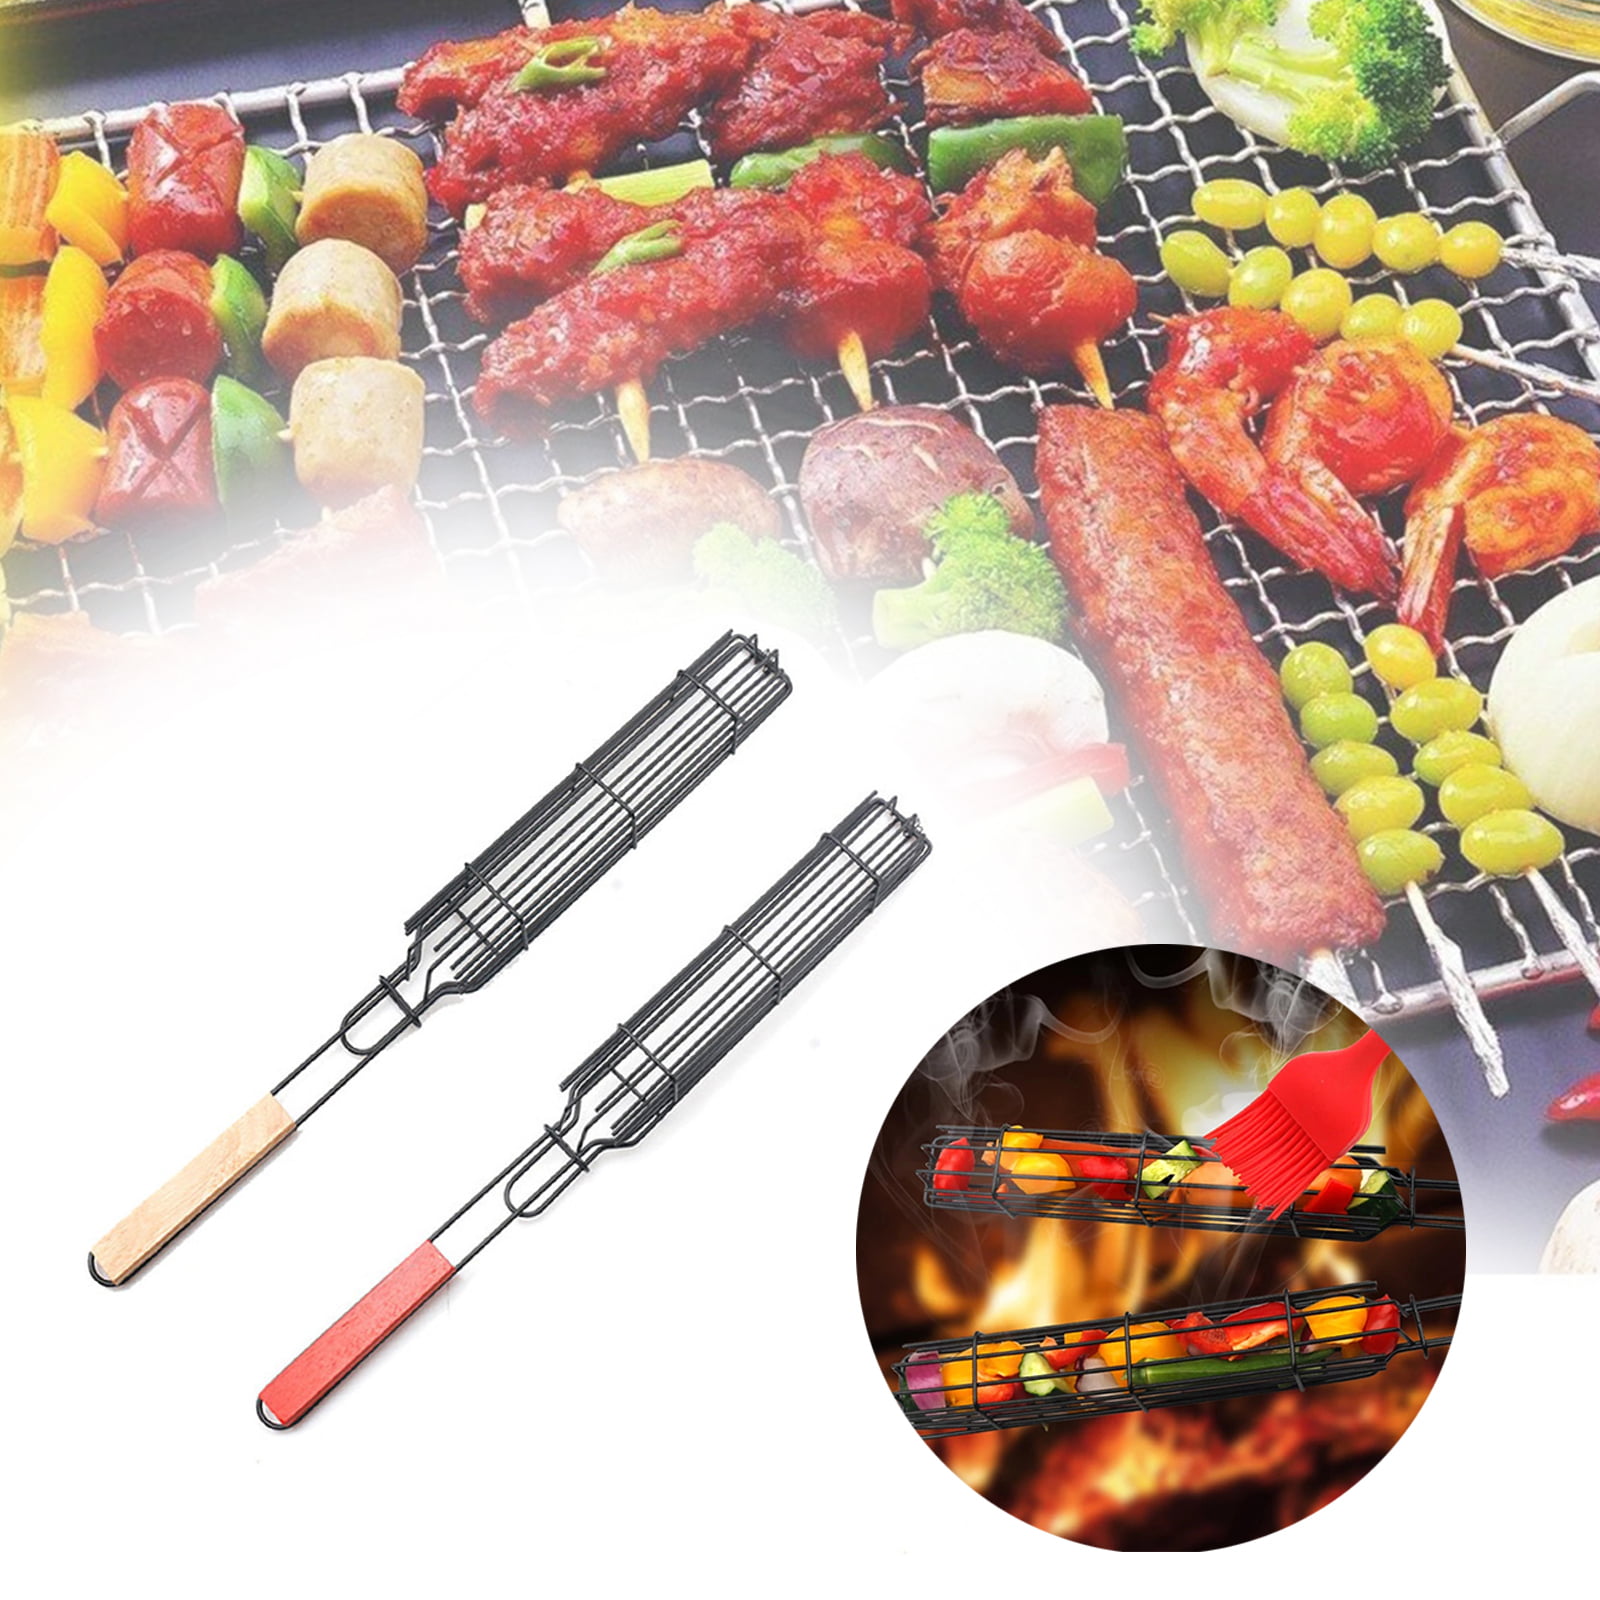 Details about   Kabob Grilling Baskets Nonstick Grill Baskets Outdoor Grilling with Handle New 